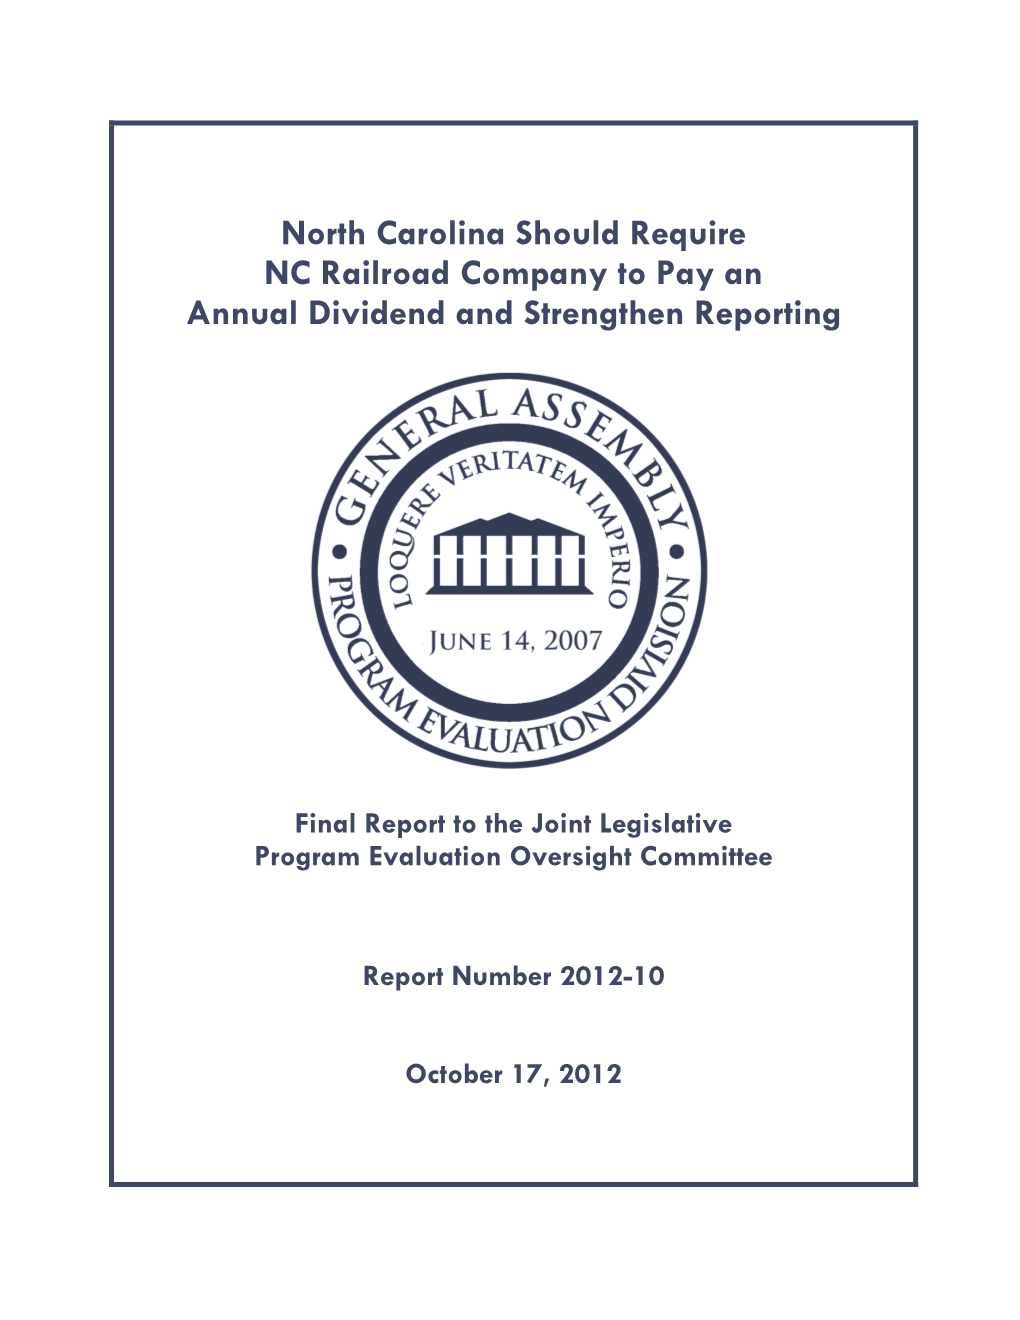 Final Report to the Joint Legislative Program Evaluation Oversight Committee